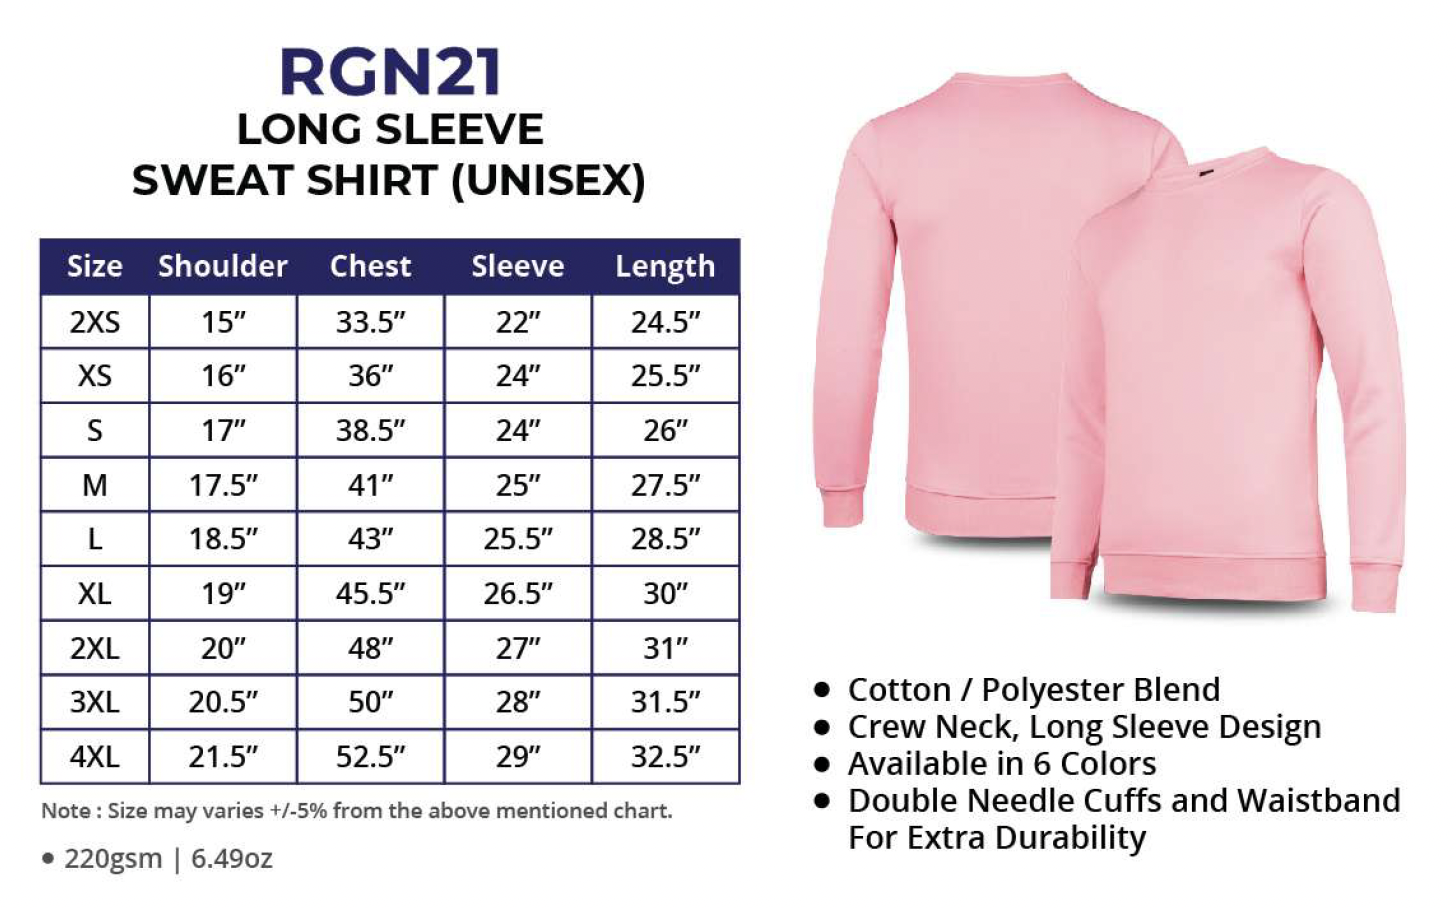 Long Sleeve Printing Size Guide_RGN21